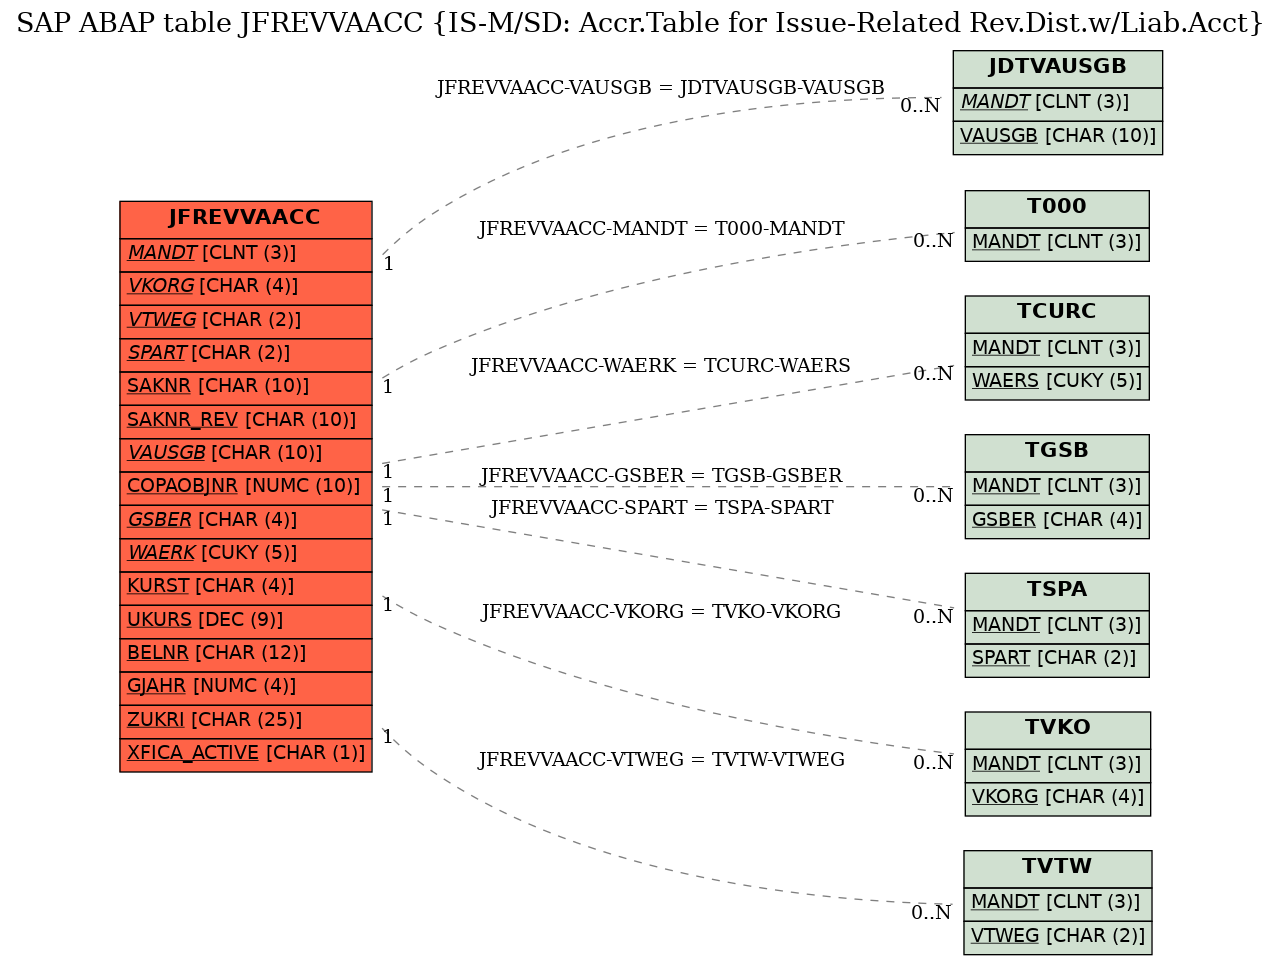 E-R Diagram for table JFREVVAACC (IS-M/SD: Accr.Table for Issue-Related Rev.Dist.w/Liab.Acct)